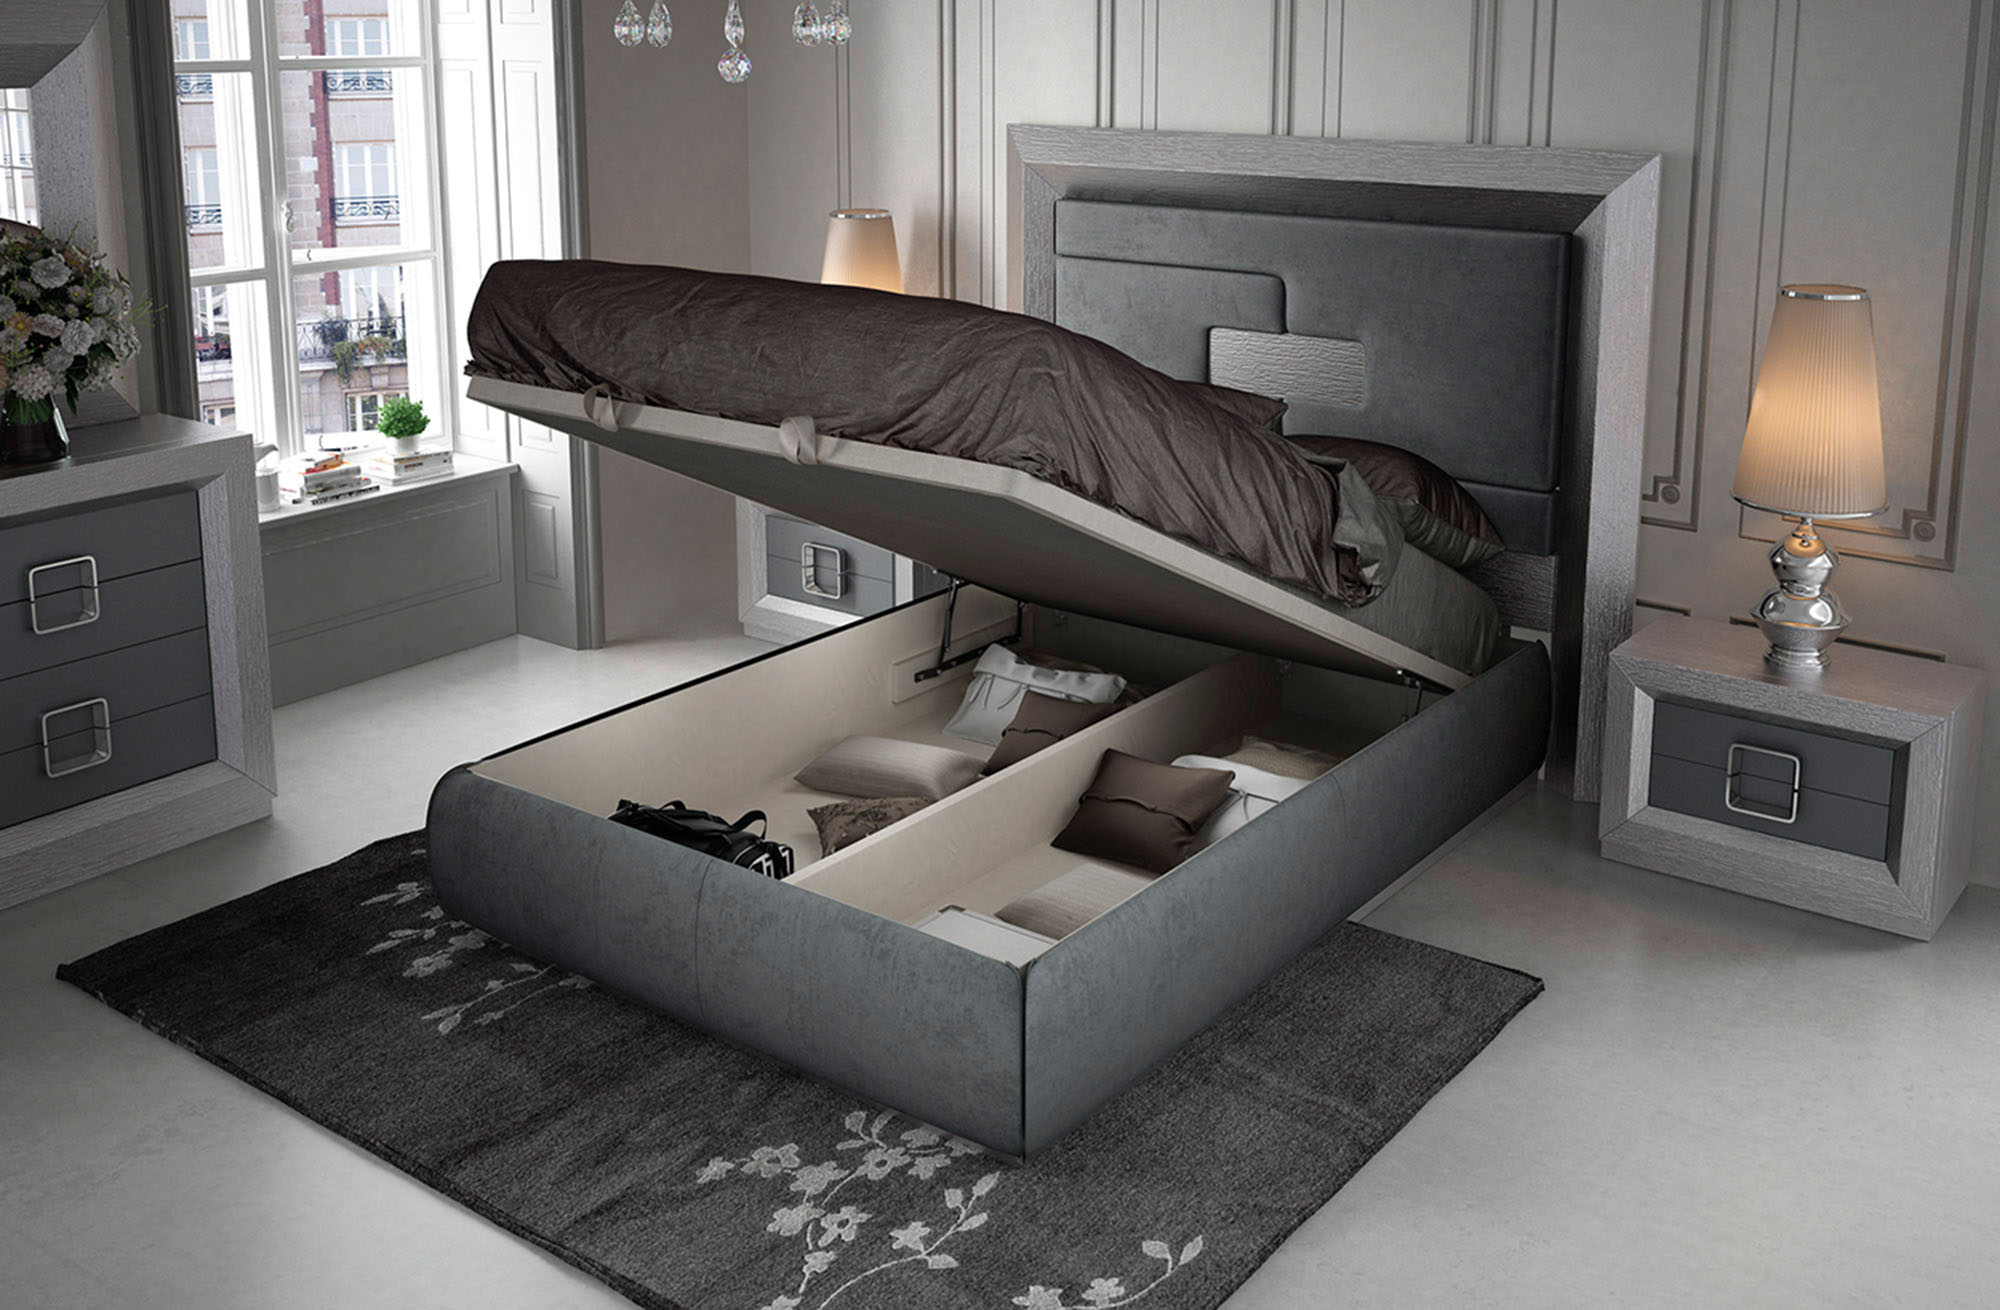 contemporary bedroom furniture images